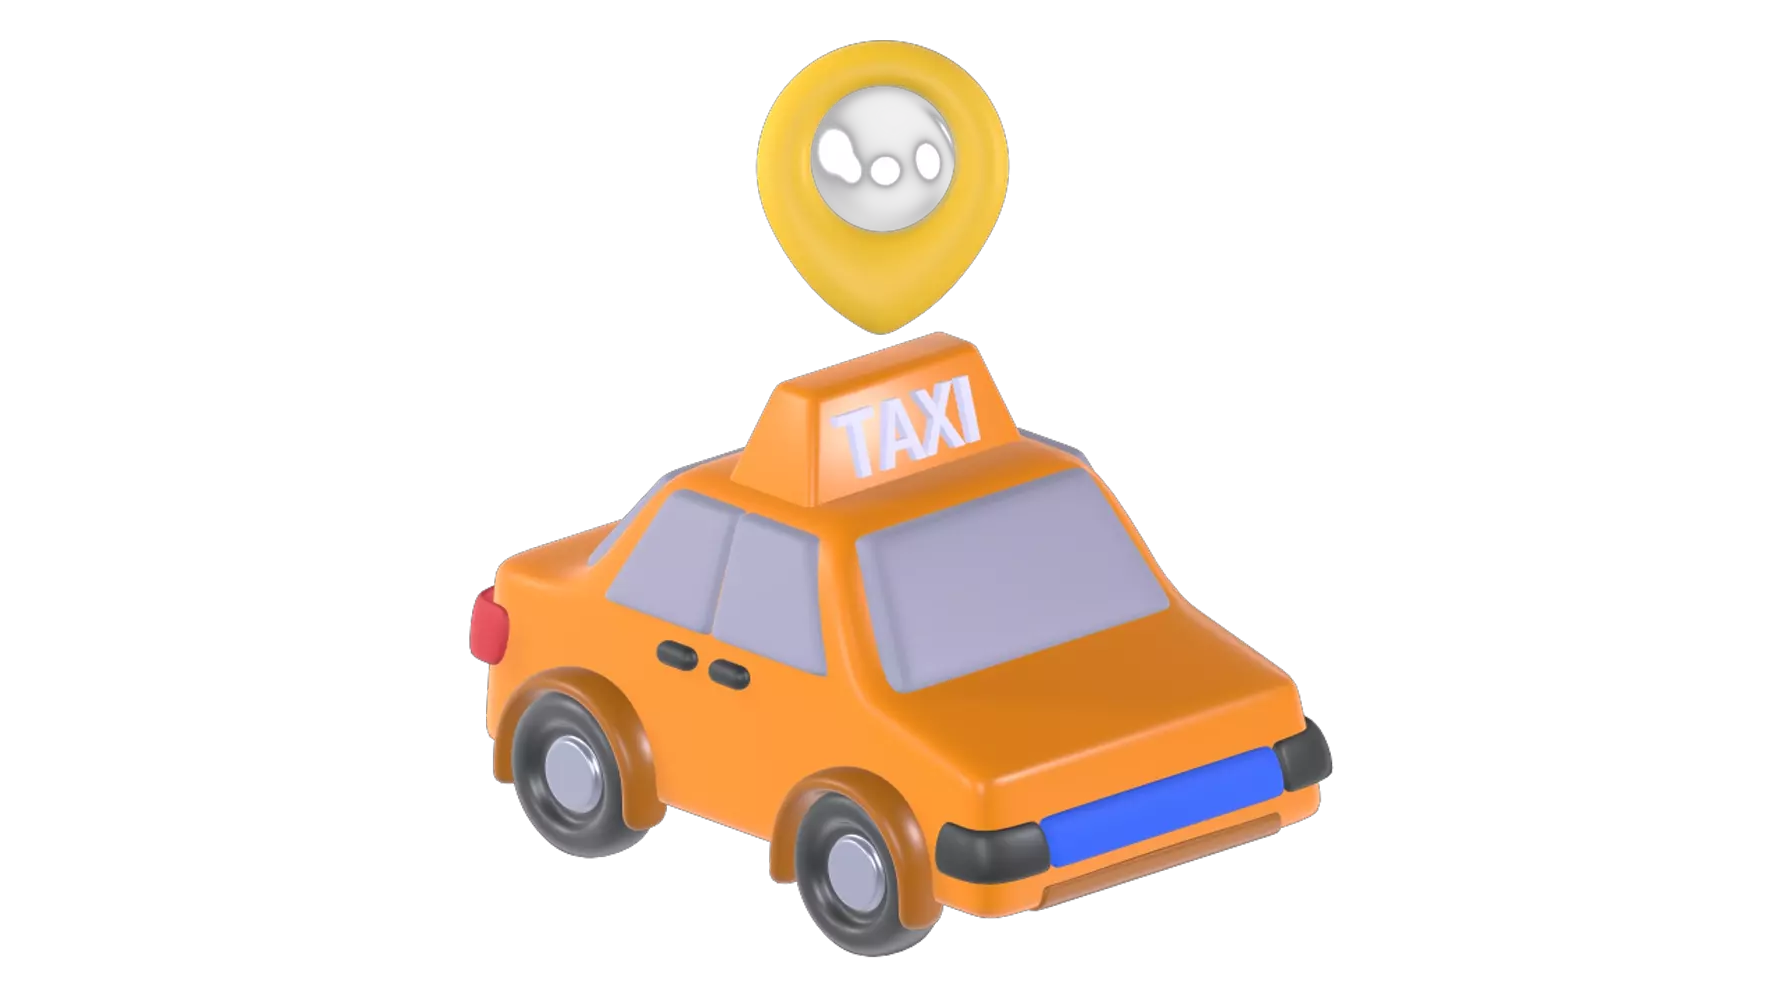 Taxi 3D Graphic